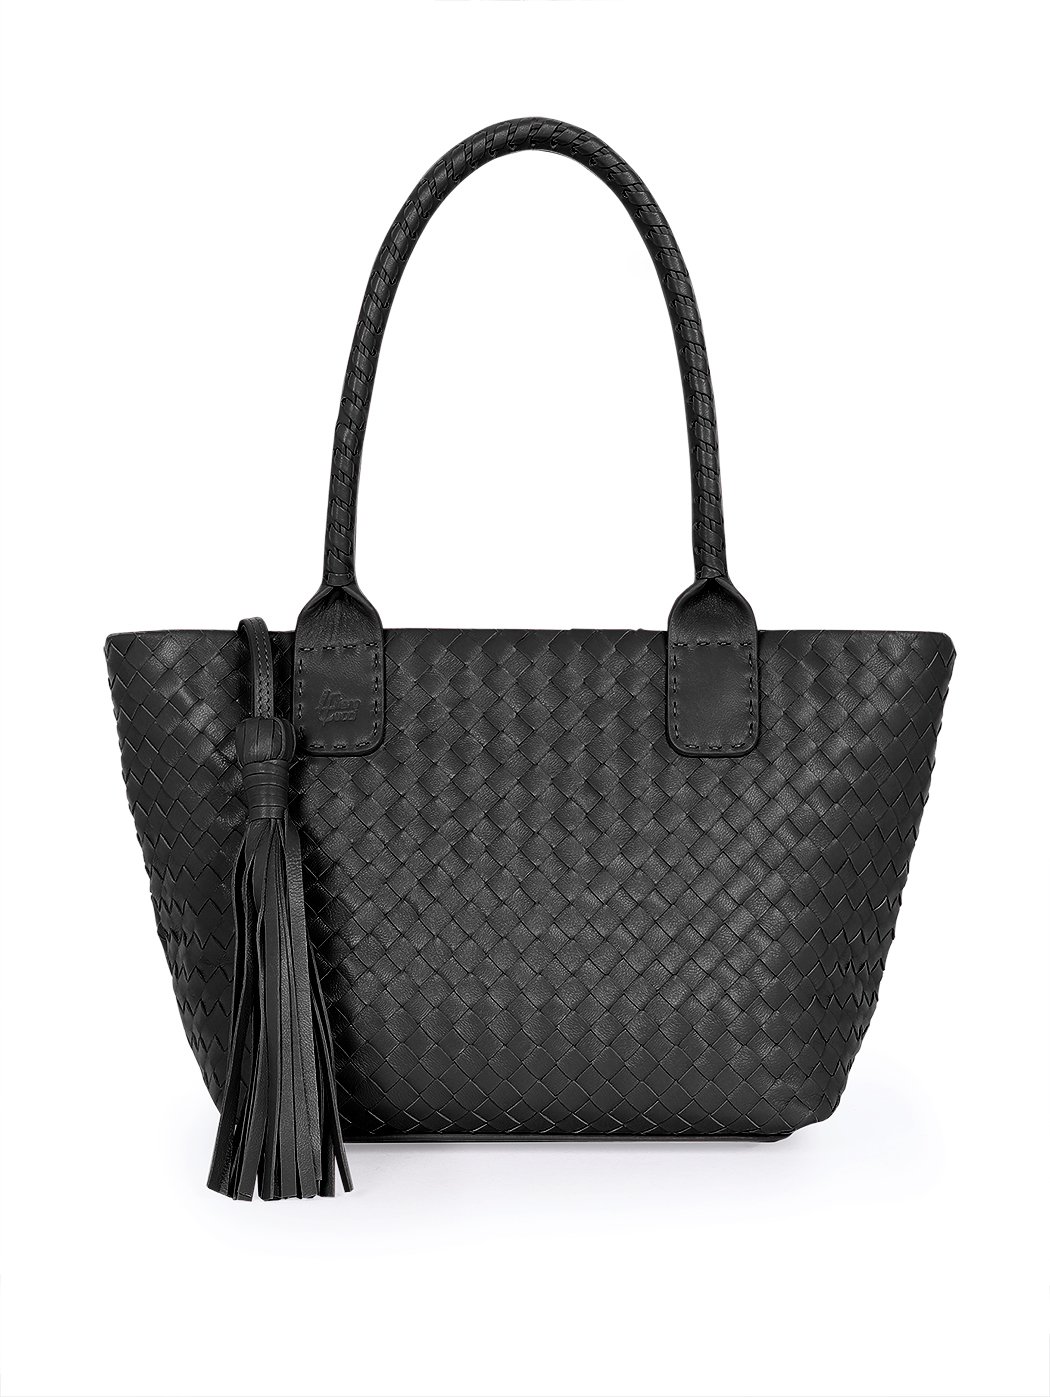 Large Top Handle Woven Leather Shoulder Tote Black